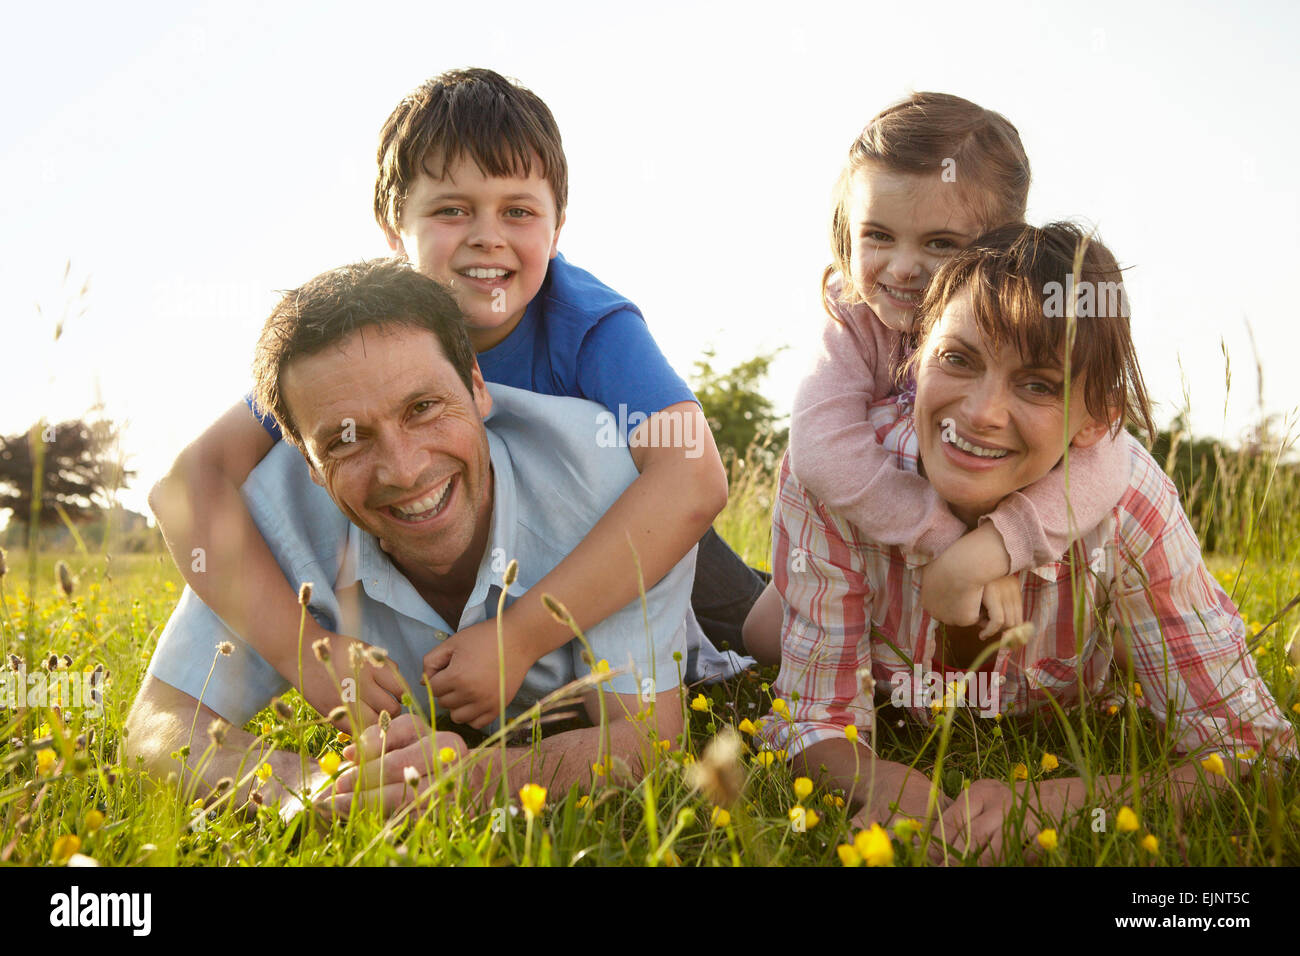 A family, two parents and two children outdoors on a summer evening. Stock Photo